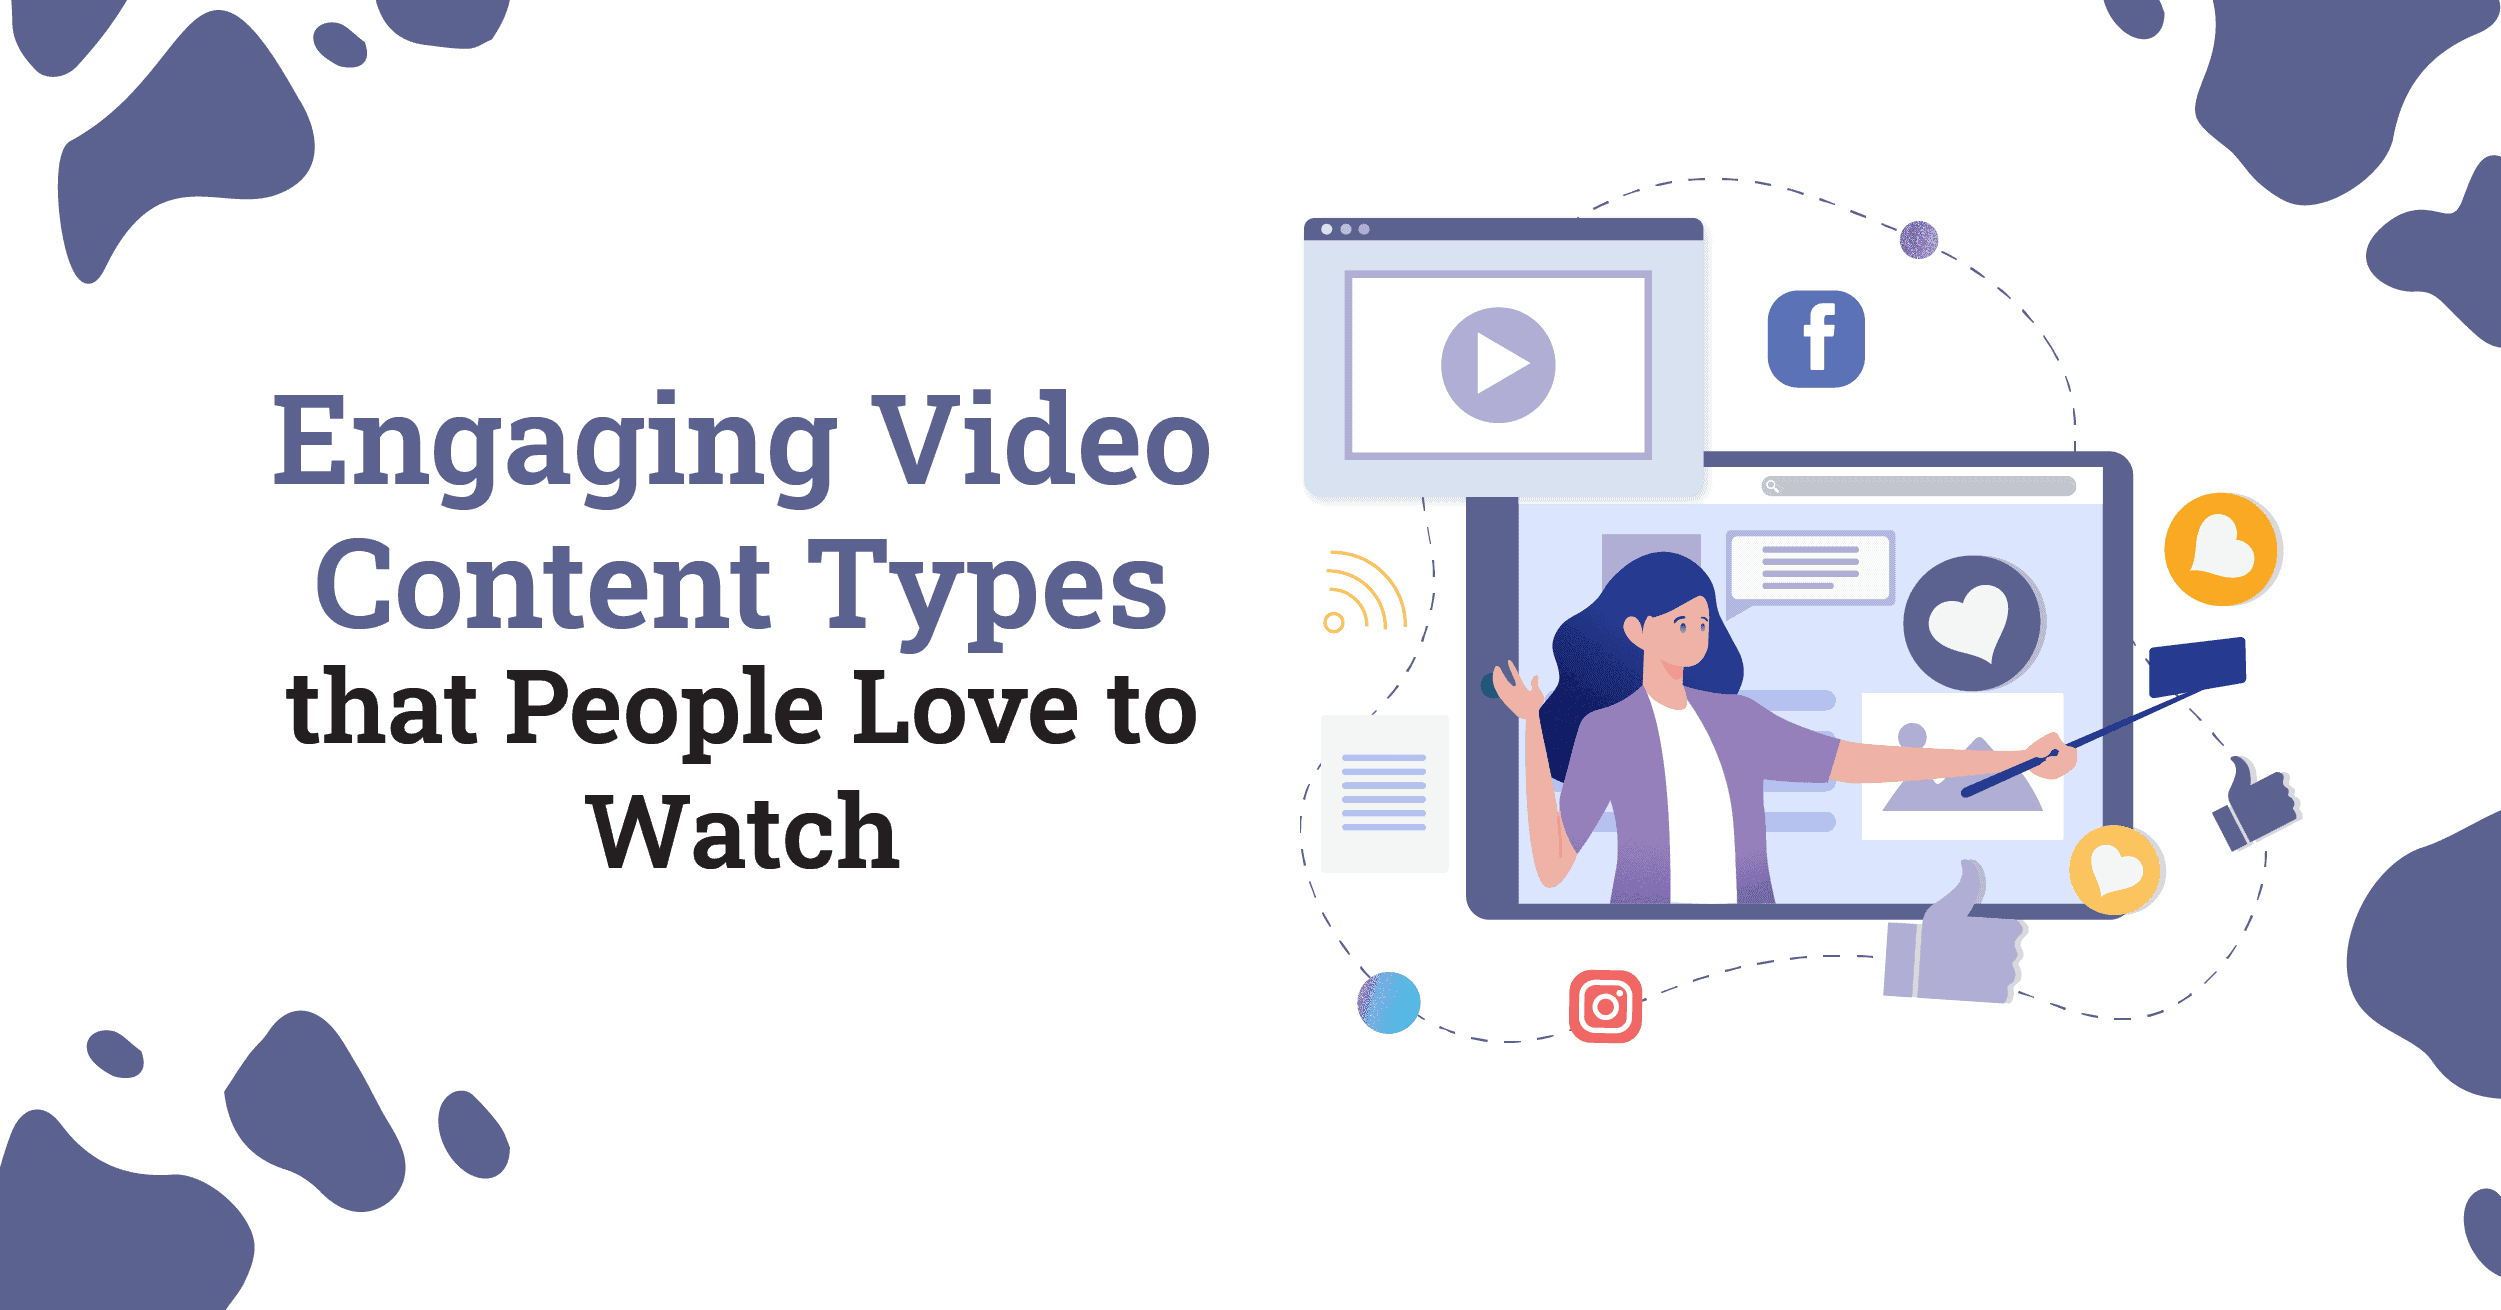 Engaging Video Content Types that People Love to Watch